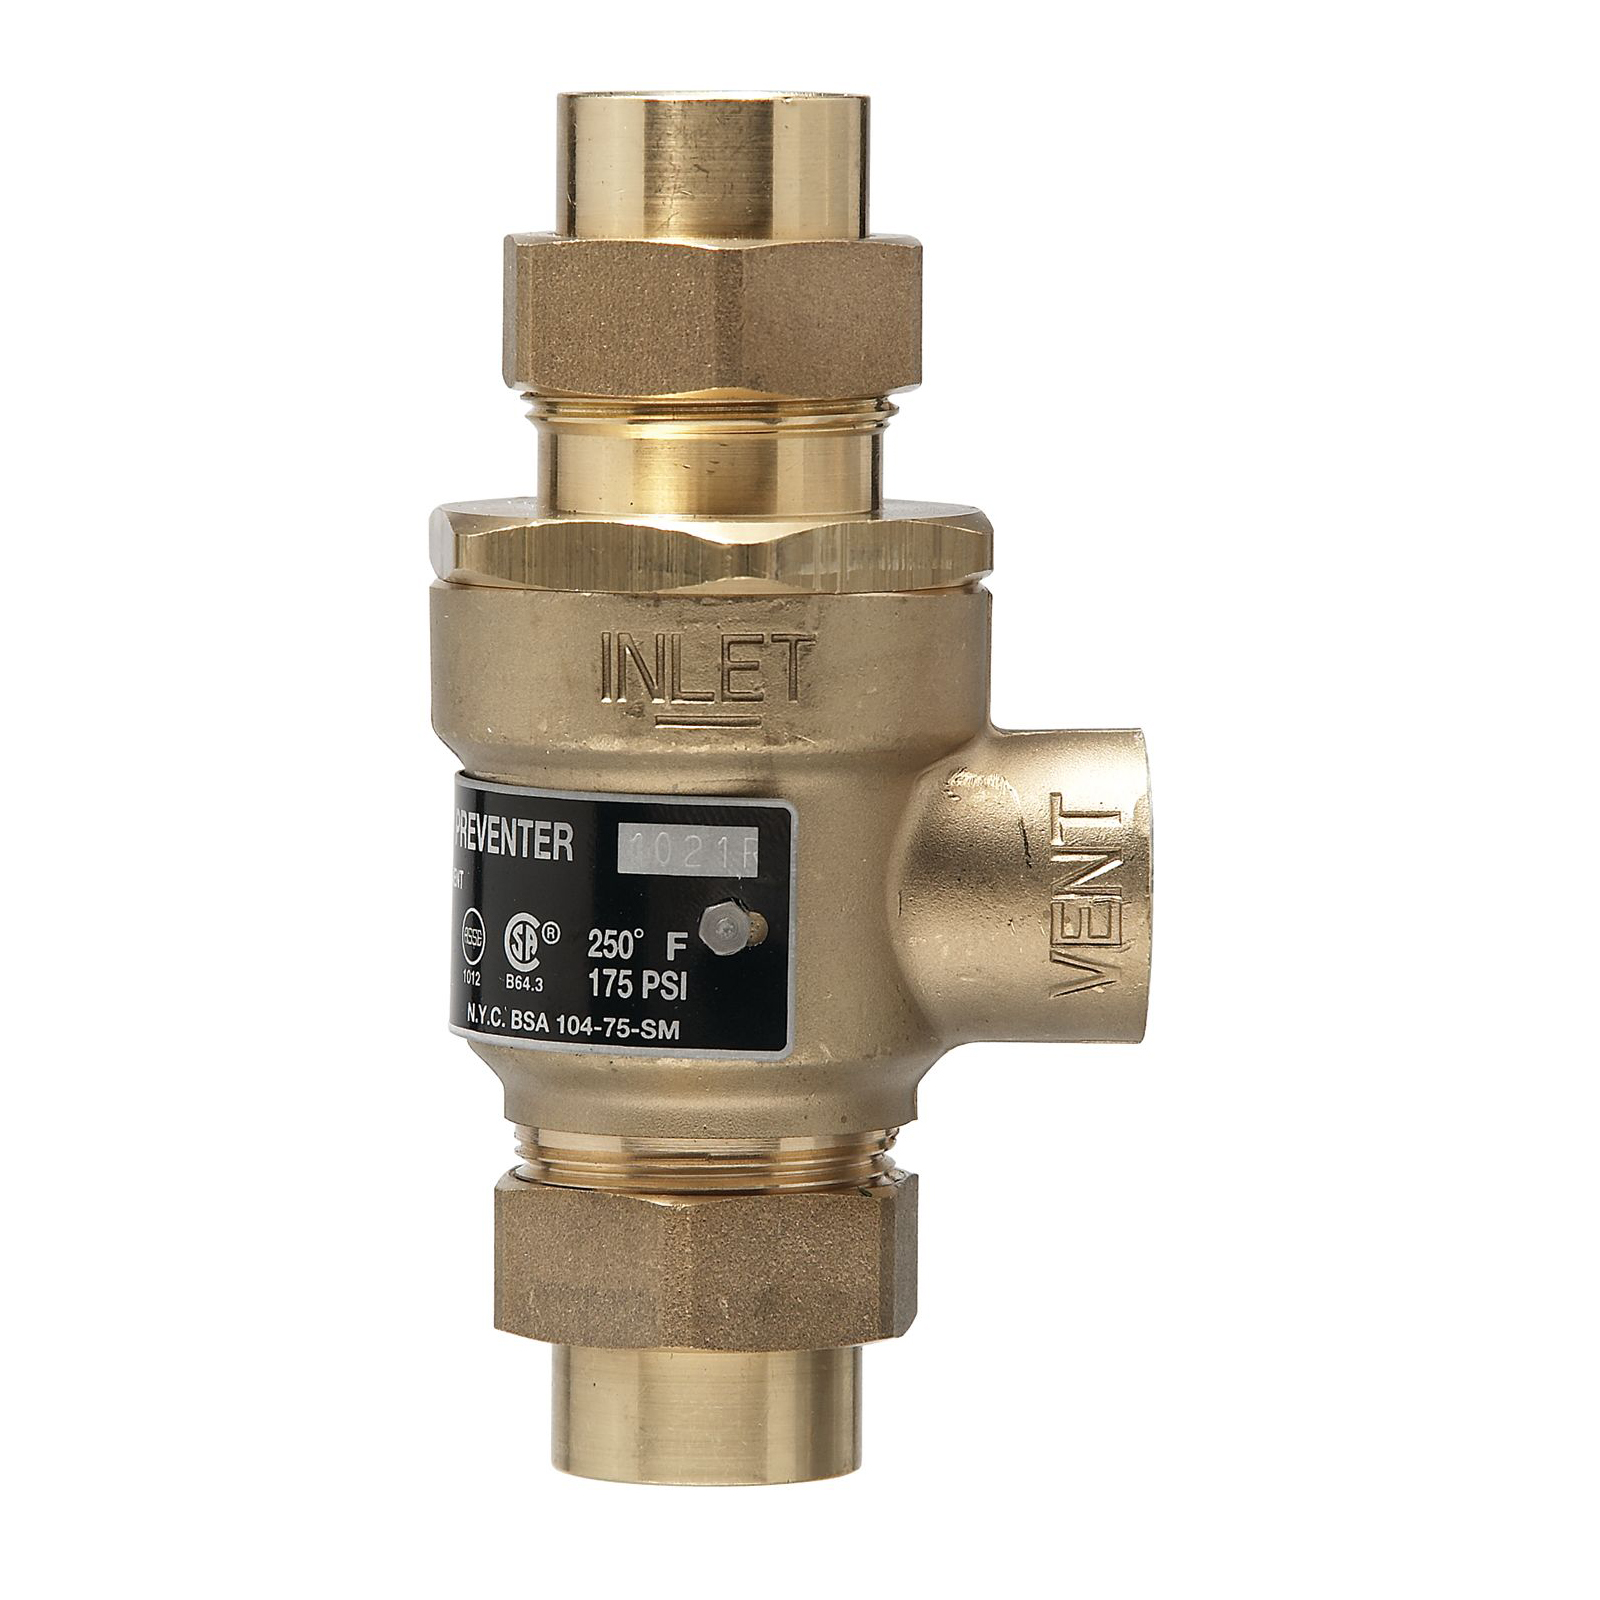 WATTS® 0061935 9D M3 Backflow Preventer, 1/2 in Nominal, Union FNPT x Union Joint End Style, Forged Brass Body, Dual Check, Domestic